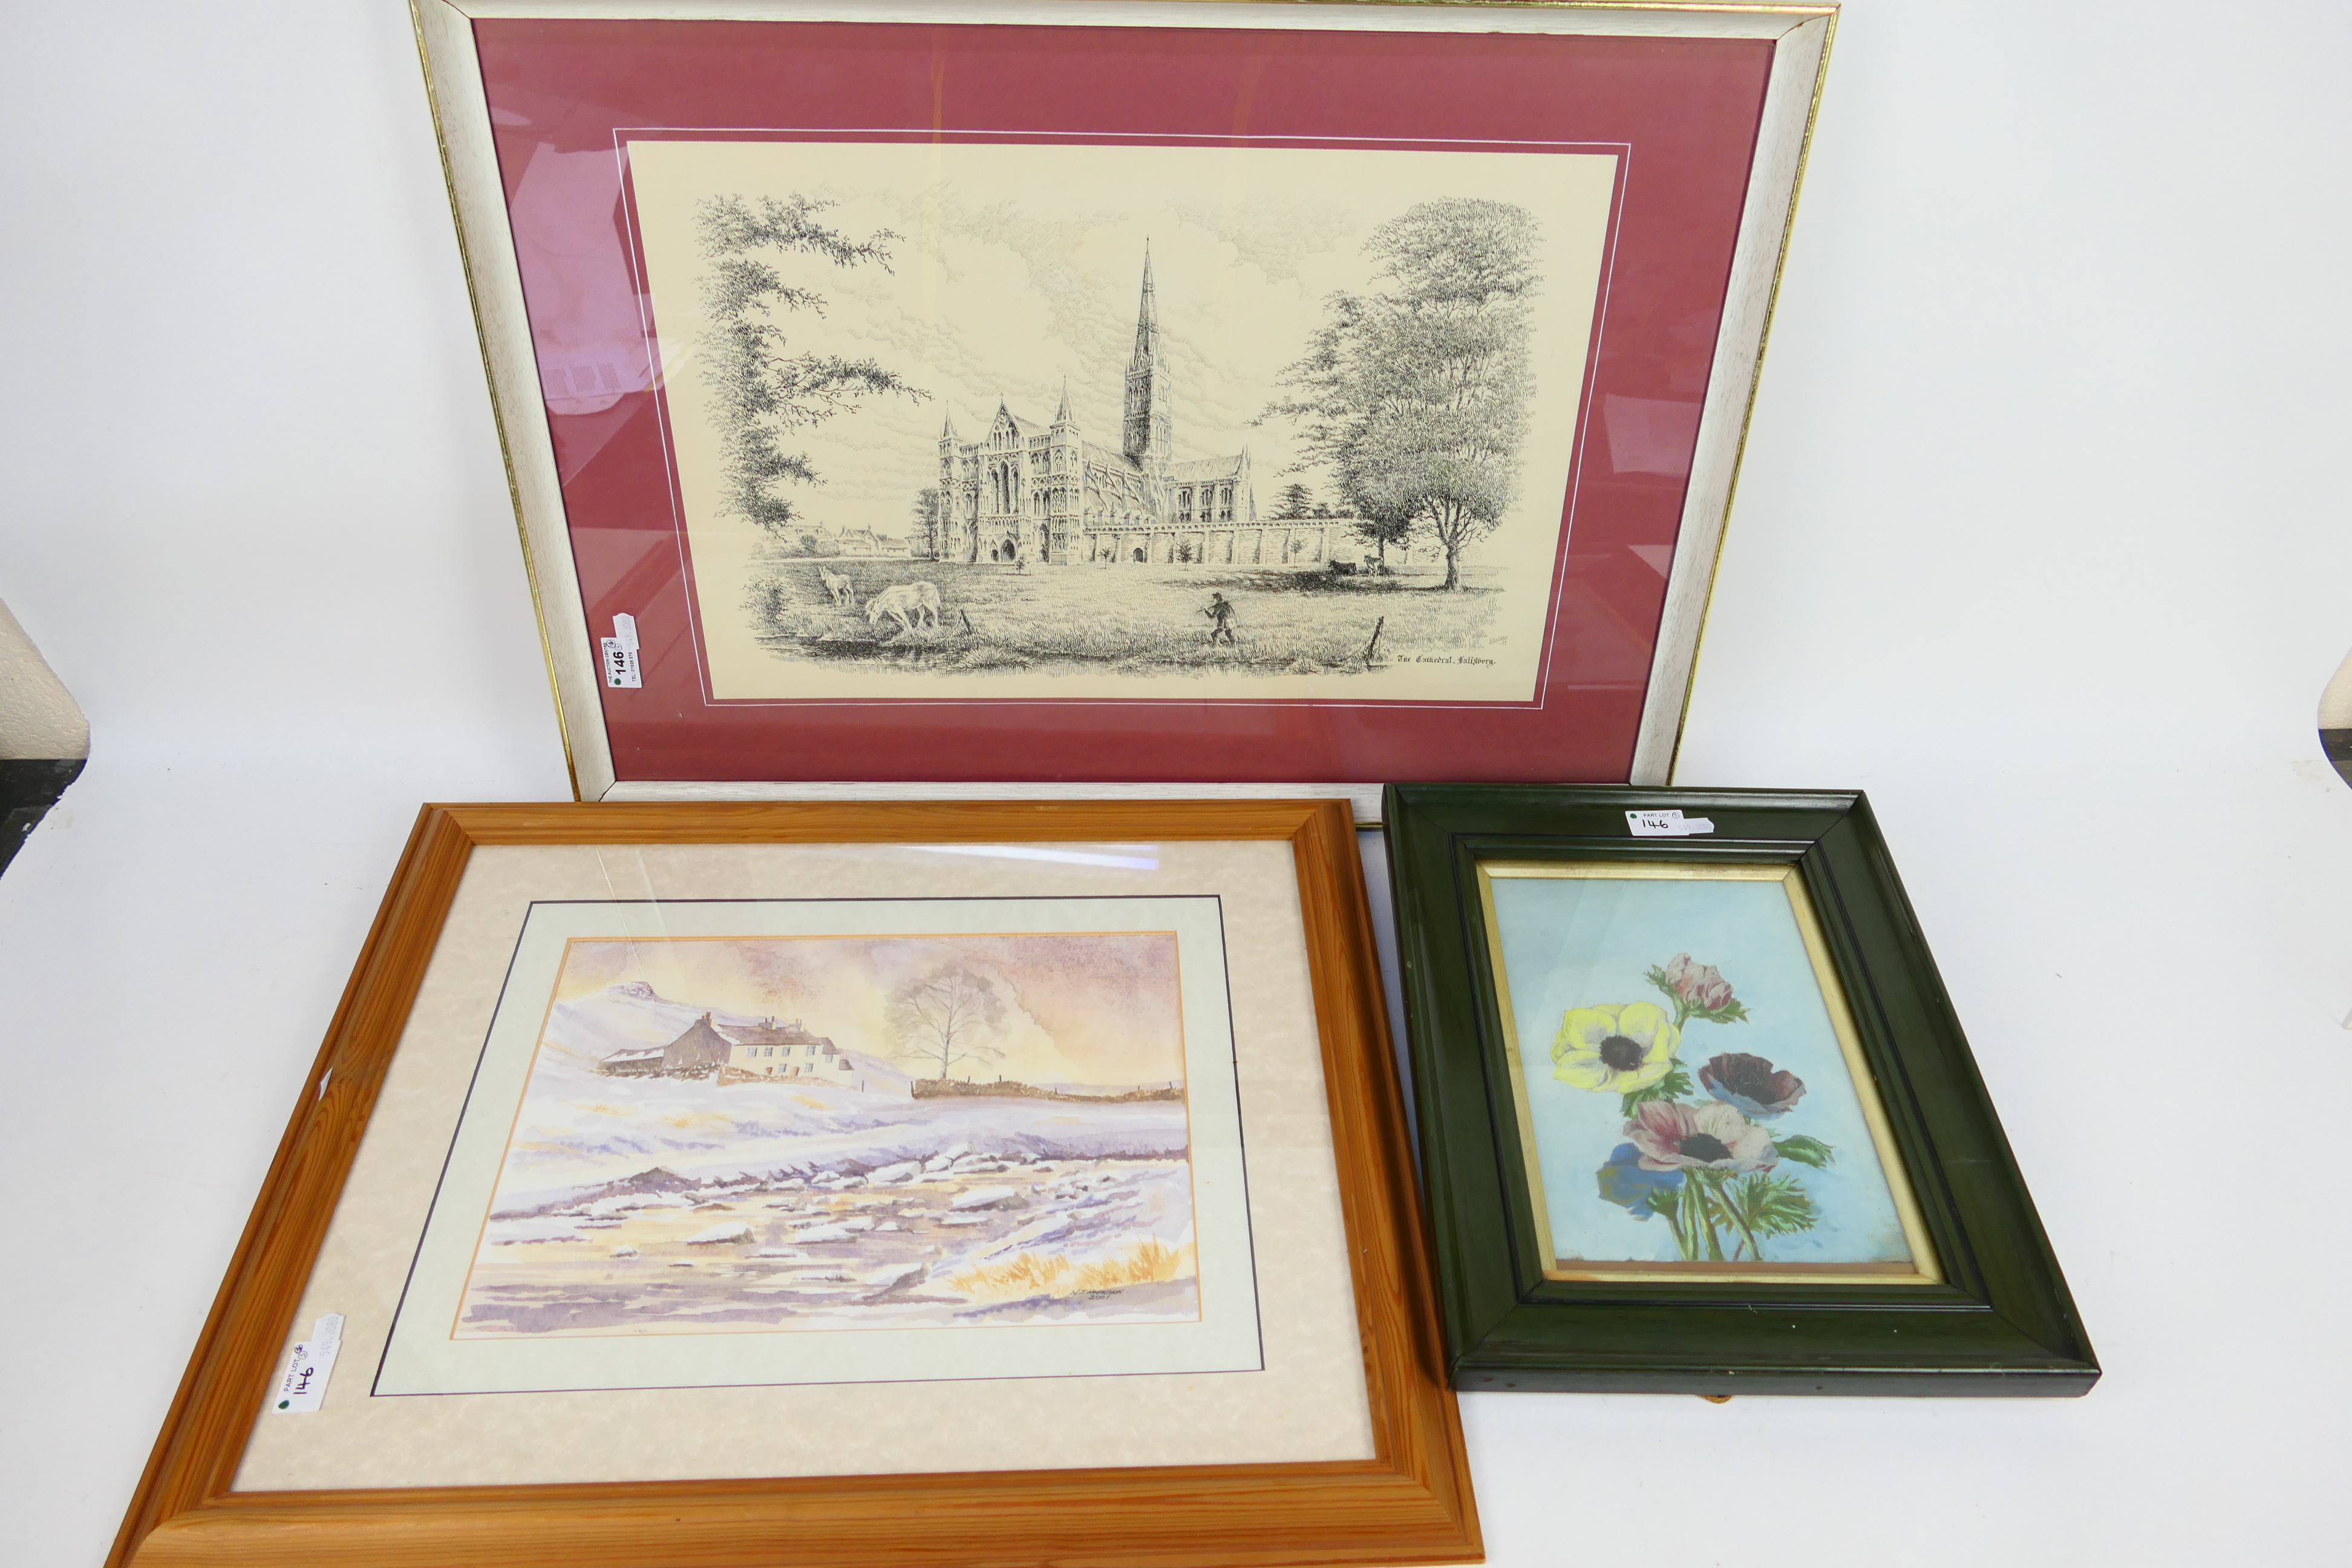 A watercolour landscape scene, signed lower right by the artist, mounted and framed under glass,